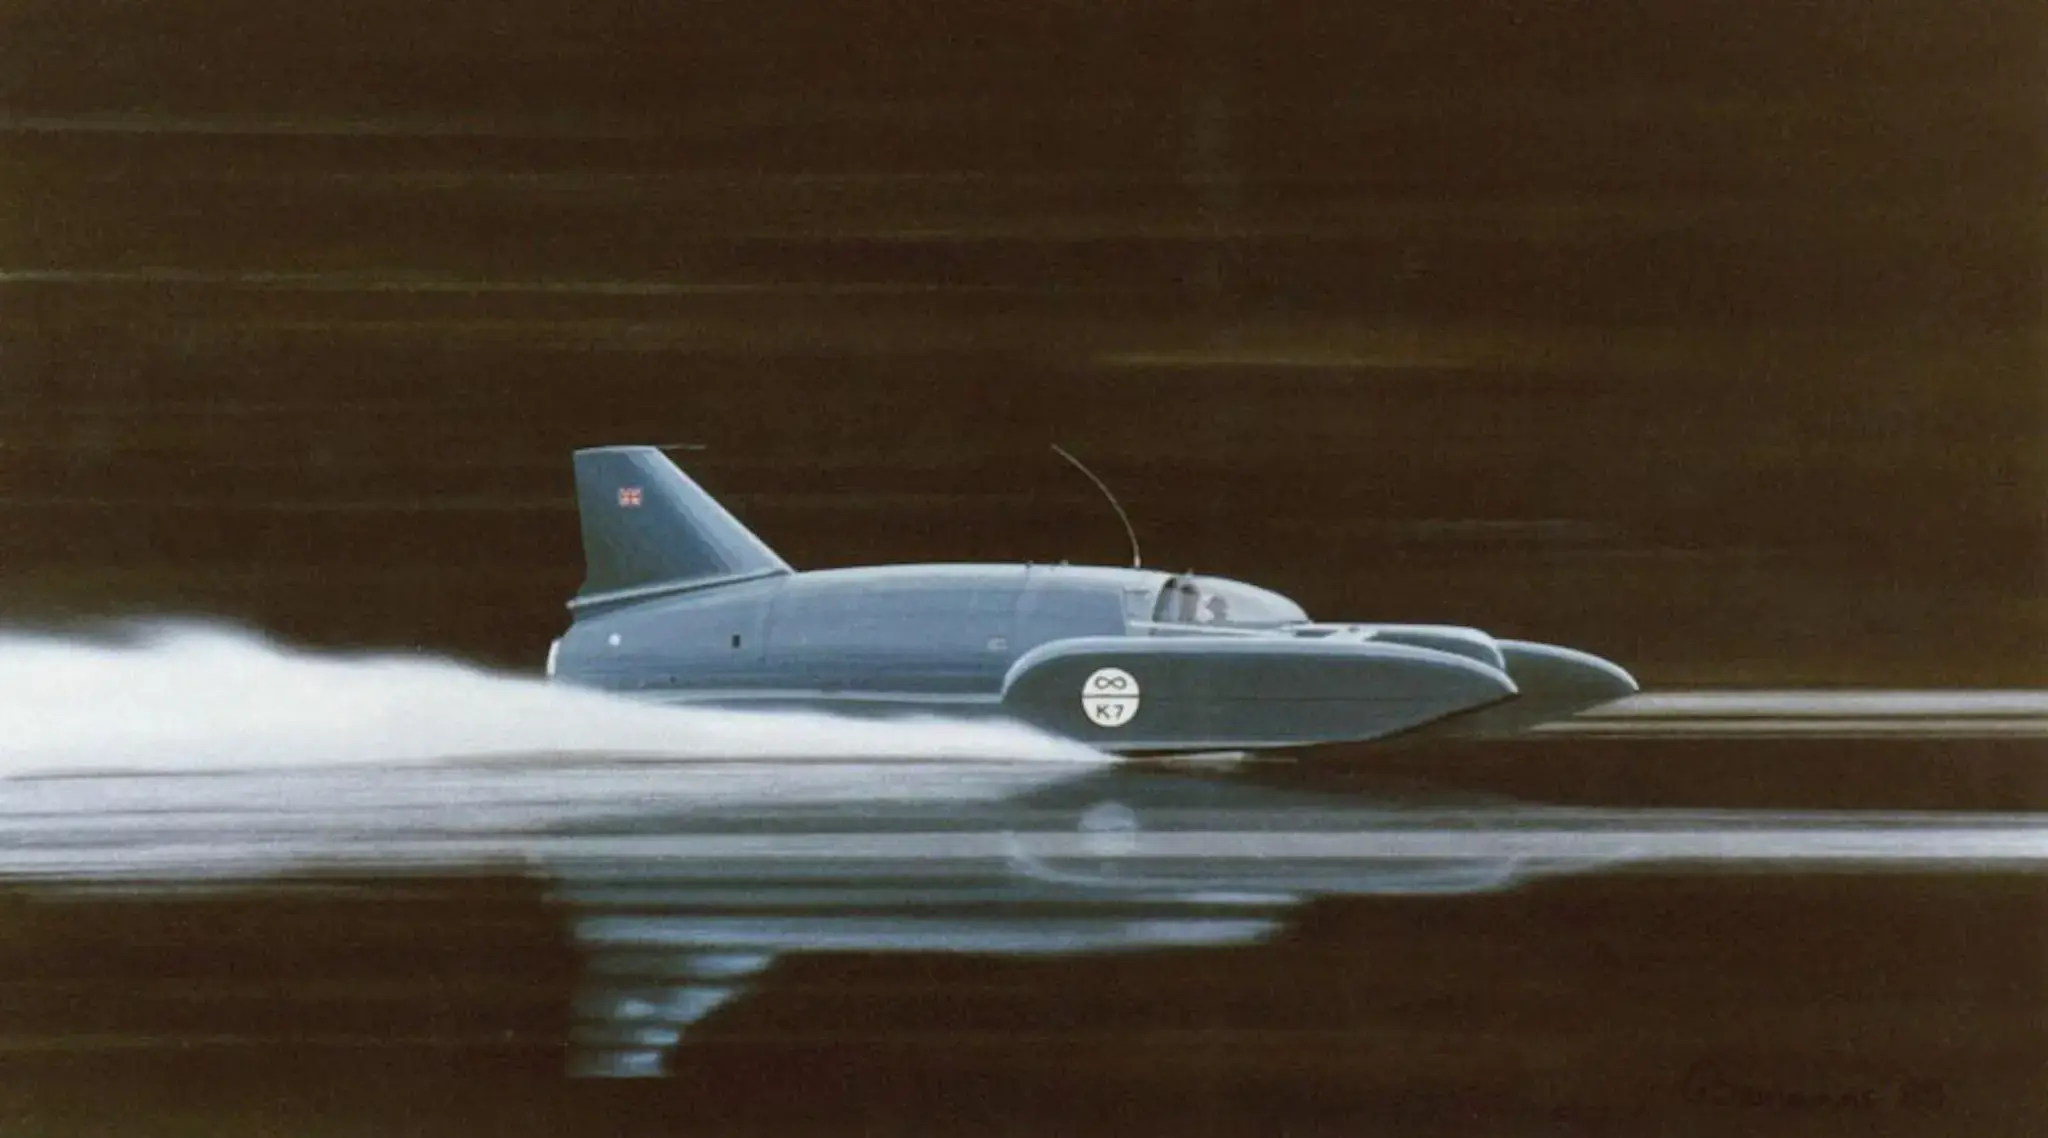 The Ruskin Museum issue legal proceedings to get Bluebird K7 home.